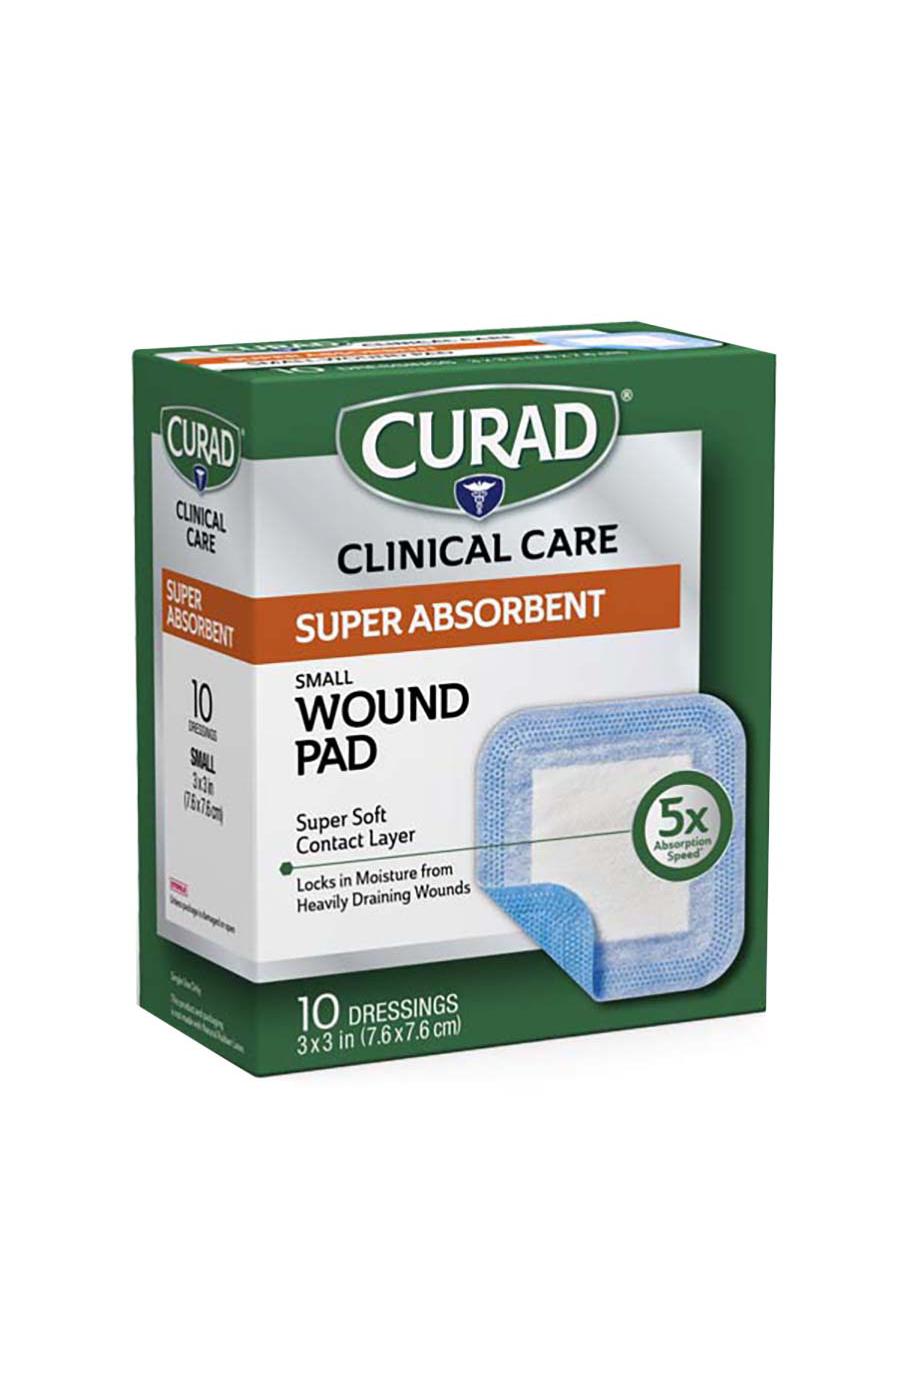 Curad Super Absorbent Wound Pads - Small; image 1 of 2